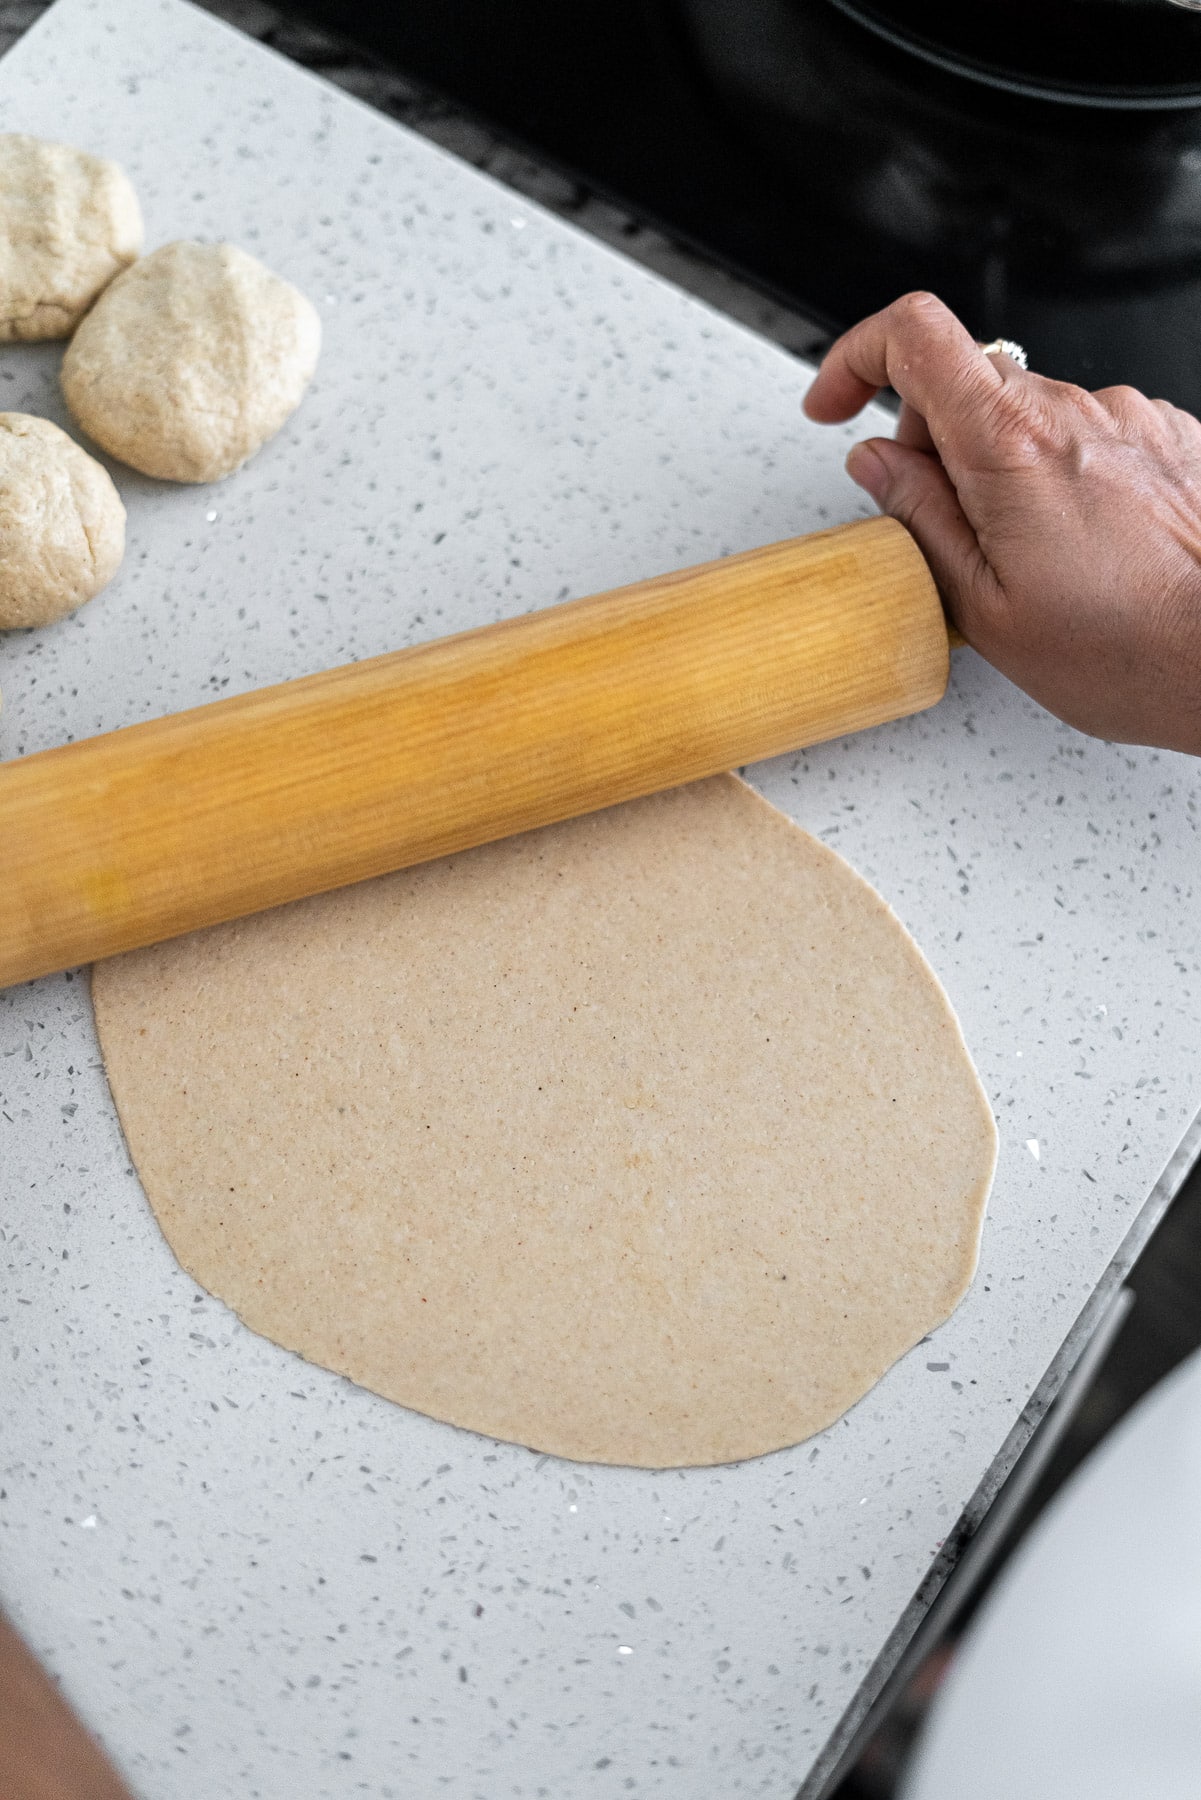 Rolling out bhature dough with a rolling pin